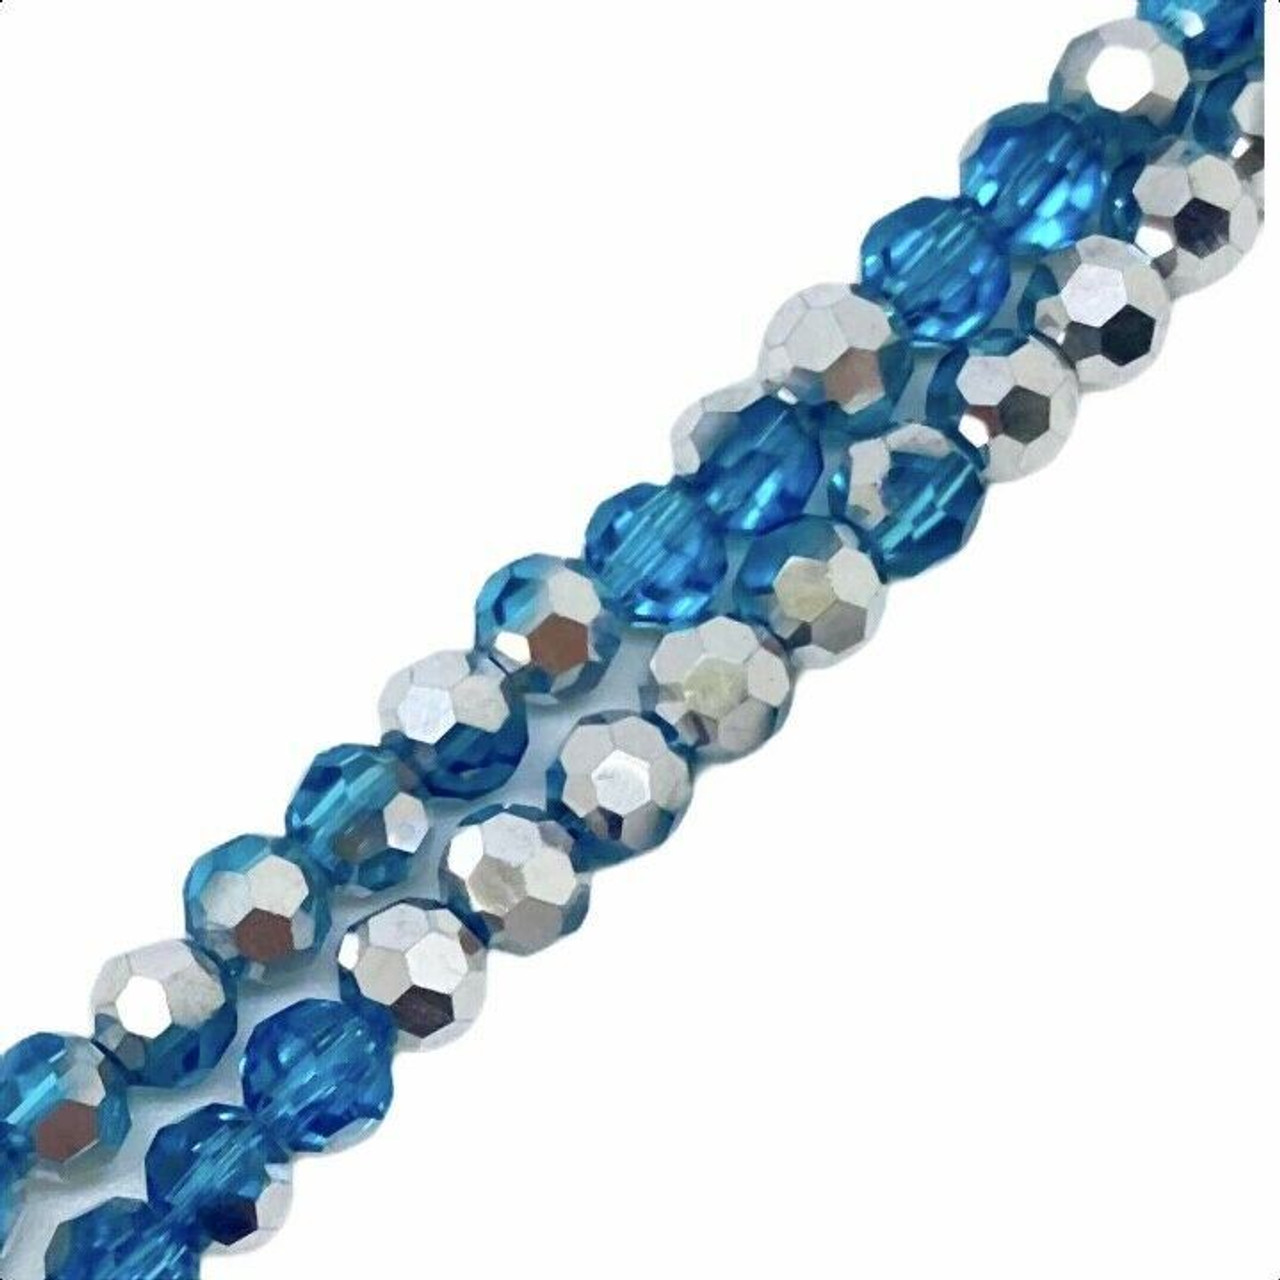 Strand of faceted round glass beads - approx 4mm, Turquoise Half-Plated Silver, approx 100 beads, 14-16in